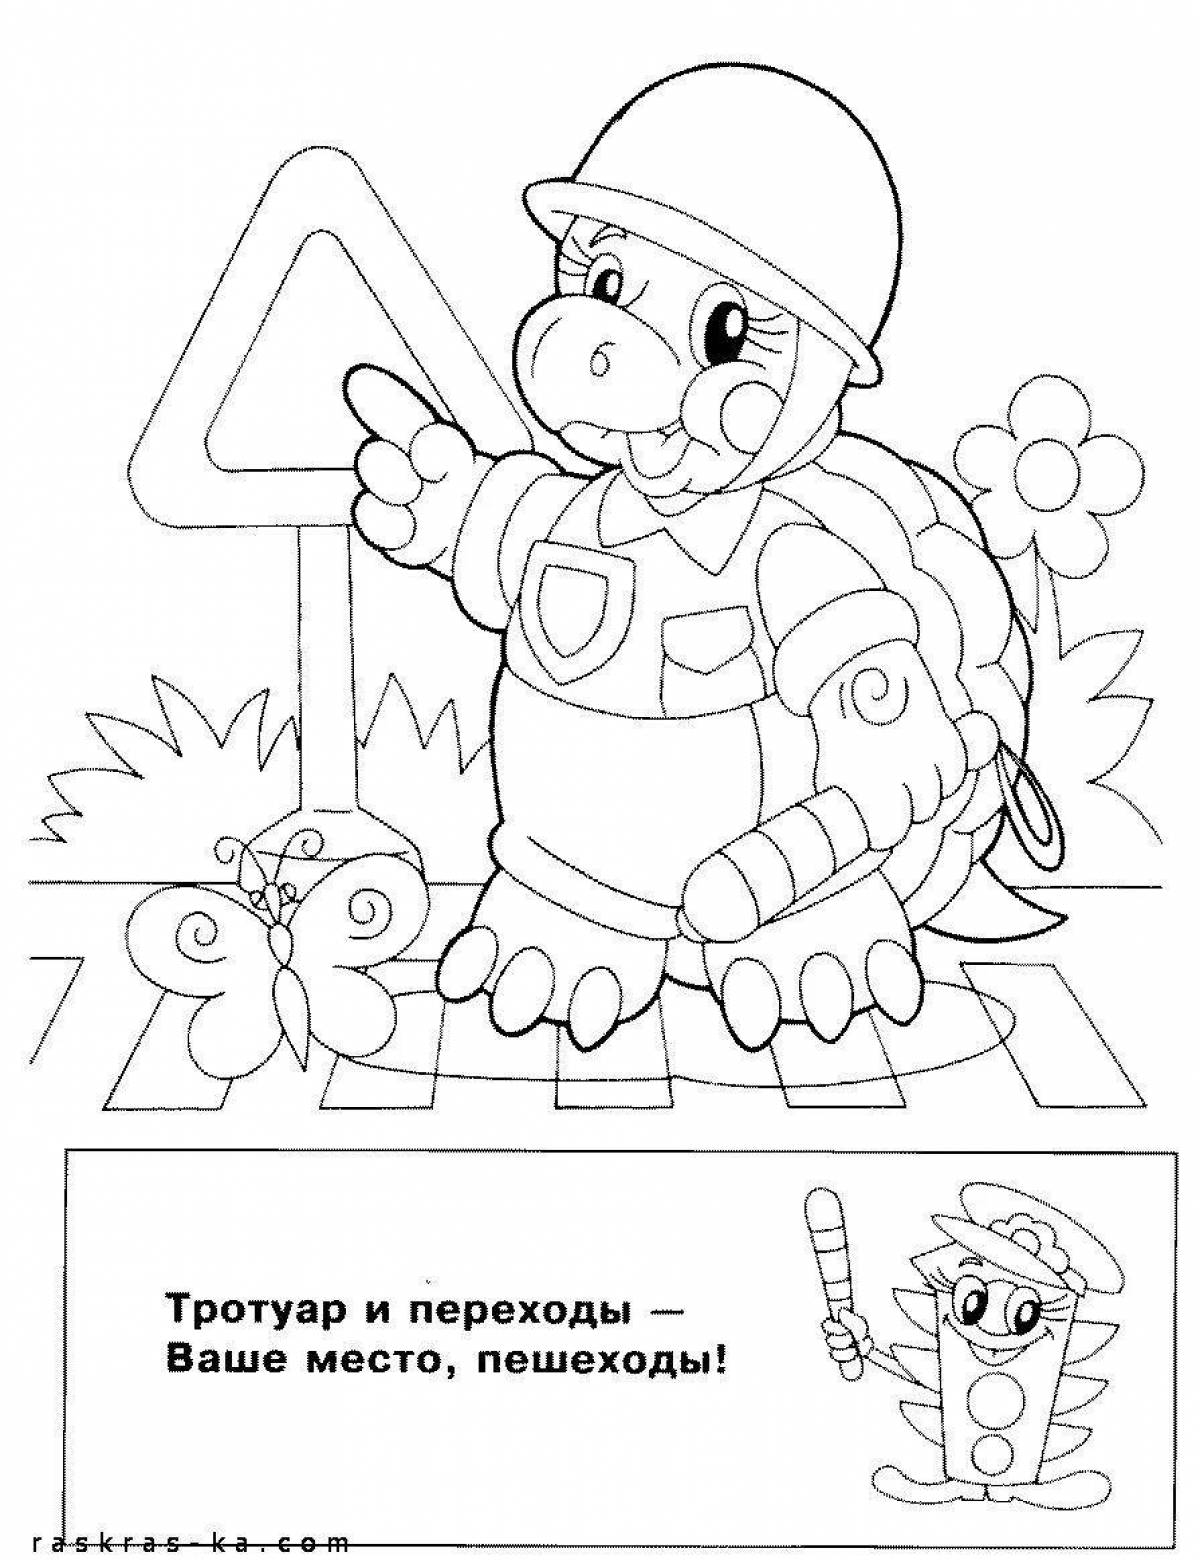 Inviting coloring book for the rules of the road in kindergarten